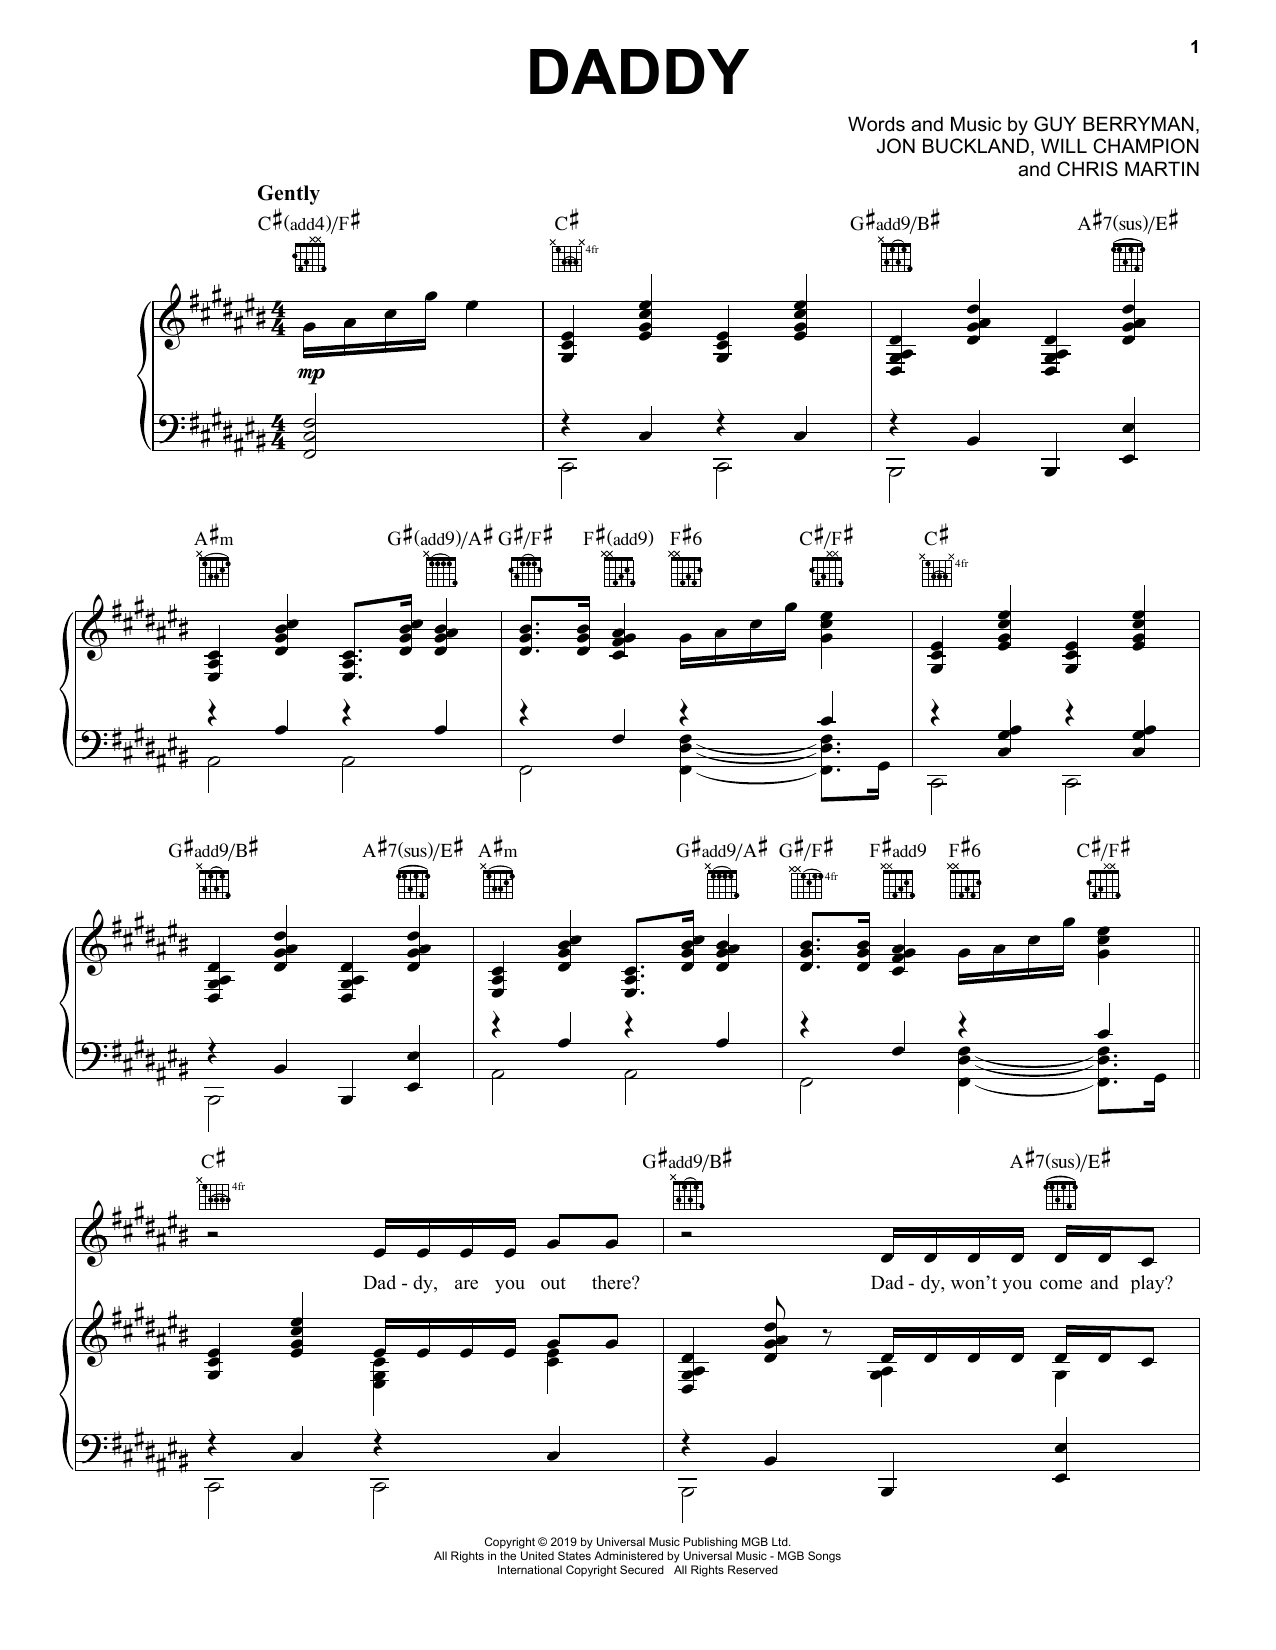 Coldplay "Daddy" Sheet Music PDF Notes, Chords | Pop Score Piano, Vocal